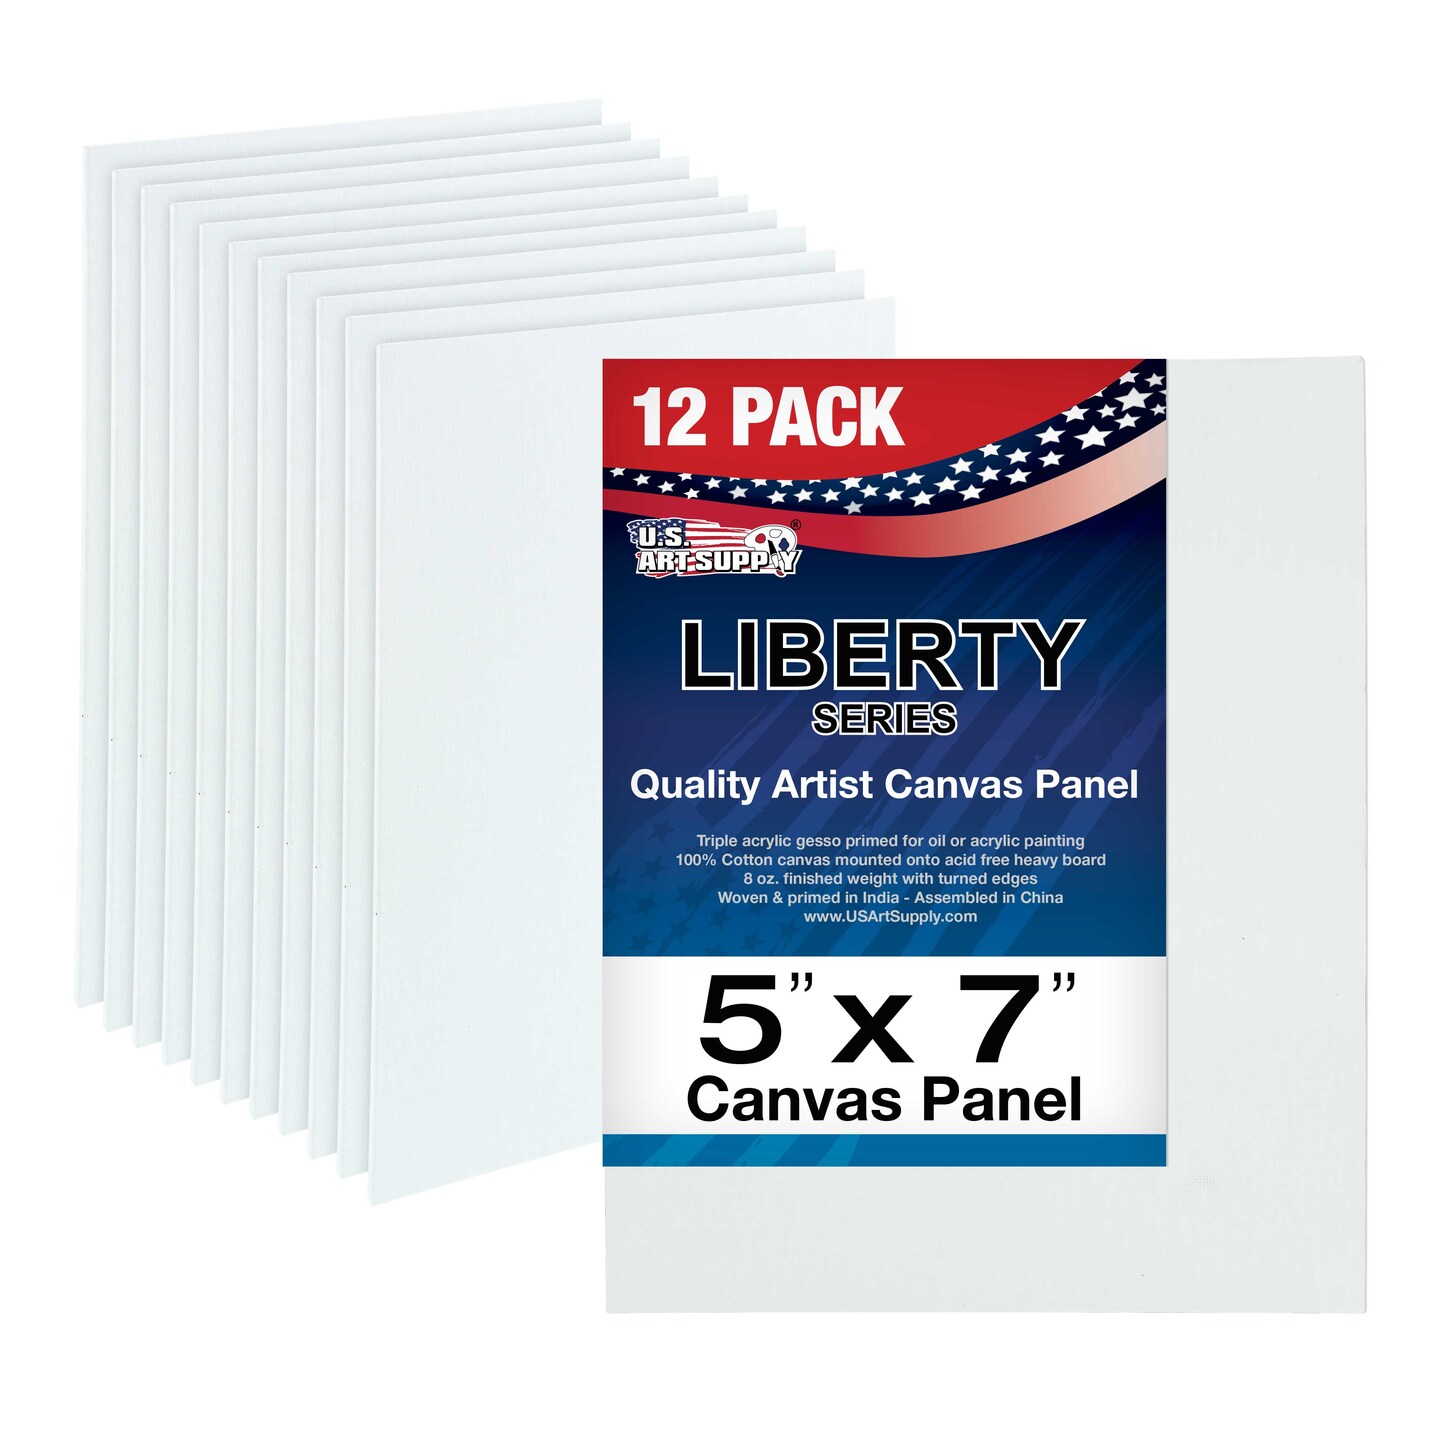 Centurion Universal Acrylic Primed Linen Panels -3x5Canvases for Painting  - 3 pack of Canvases for Oils, Acrylics, Water-Mixable Oils, and More 